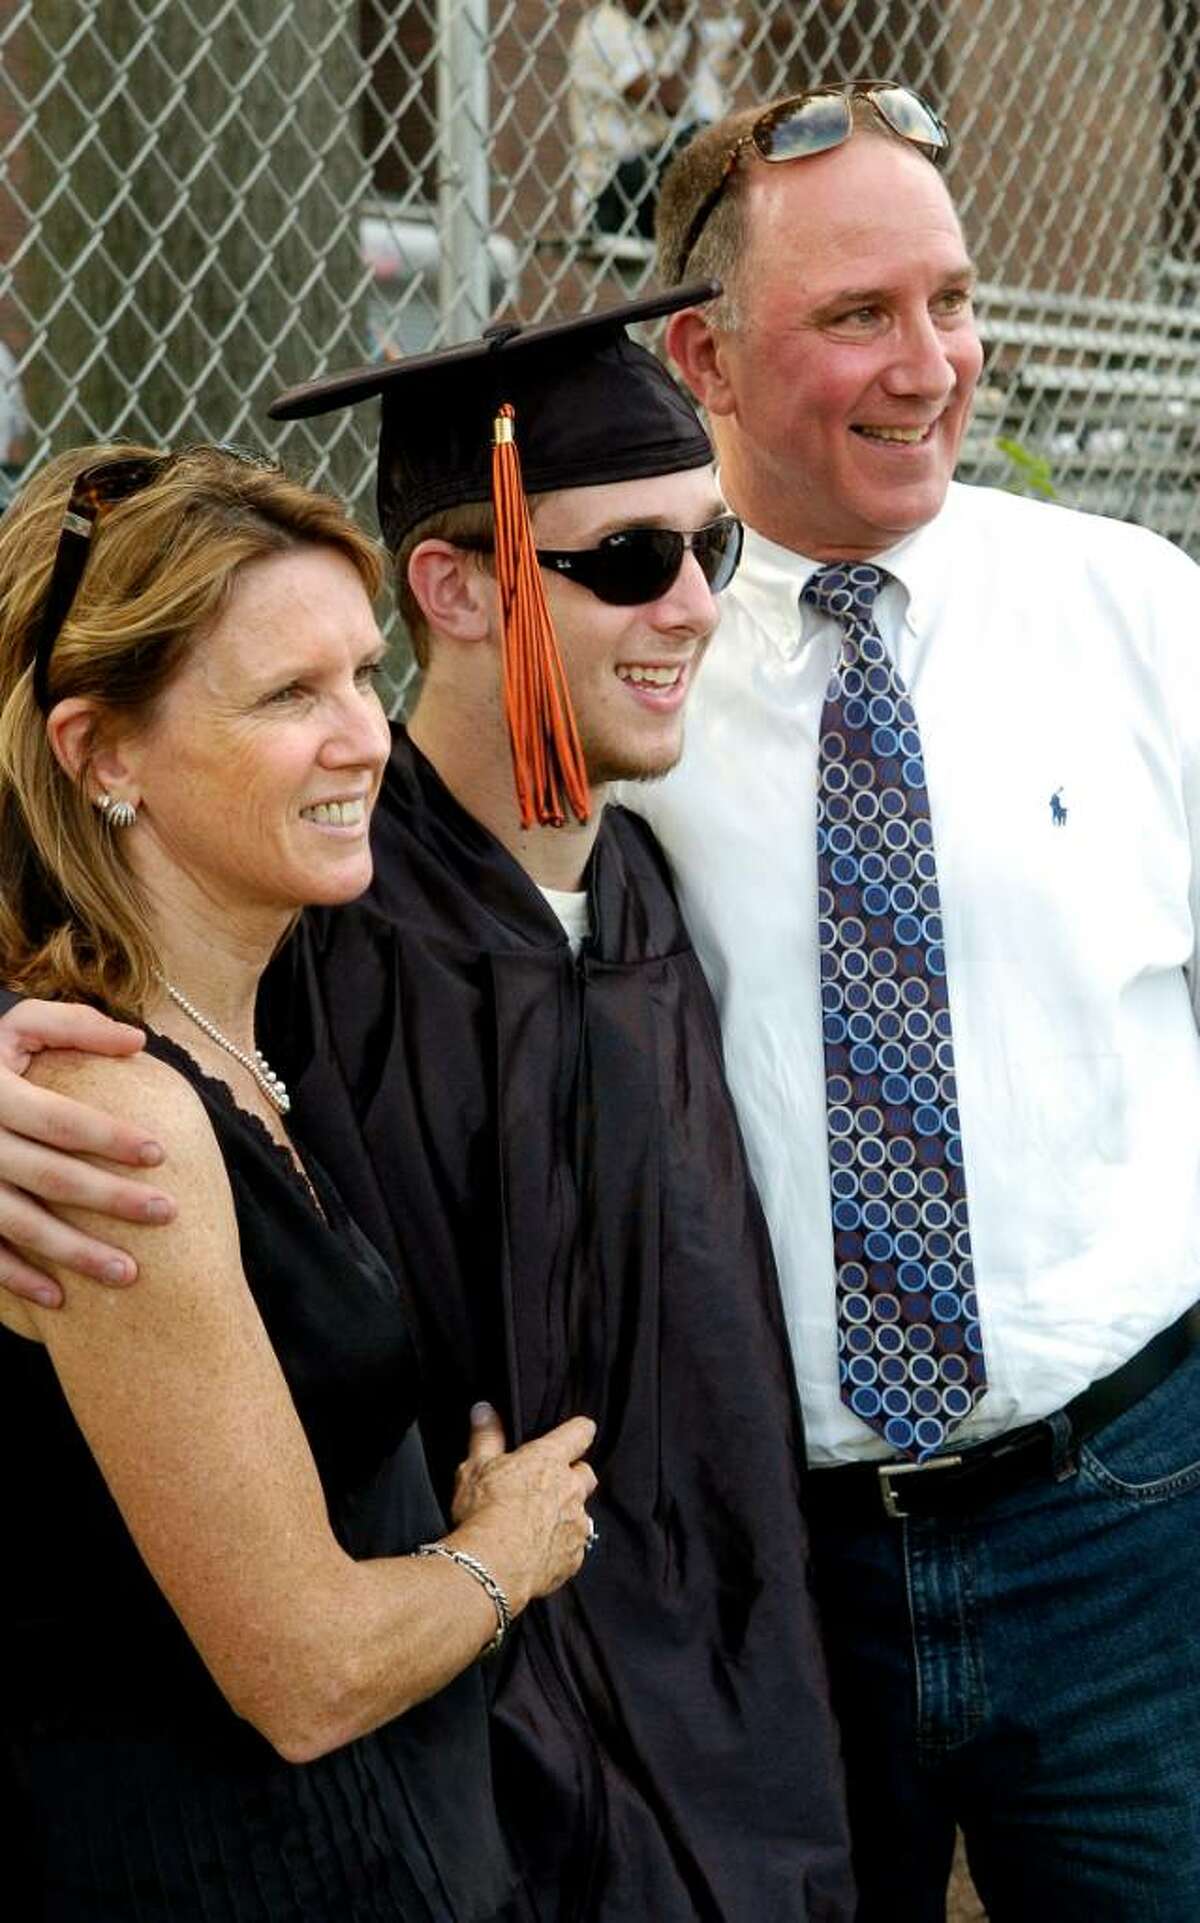 Kathy and Mike Lazarus have their photo taken with thier son Daniel who just graduated form Stamford High School. The class of 2010 graduates from Stamford High School on Thursday June 24, 2010 in Stamford, Conn.